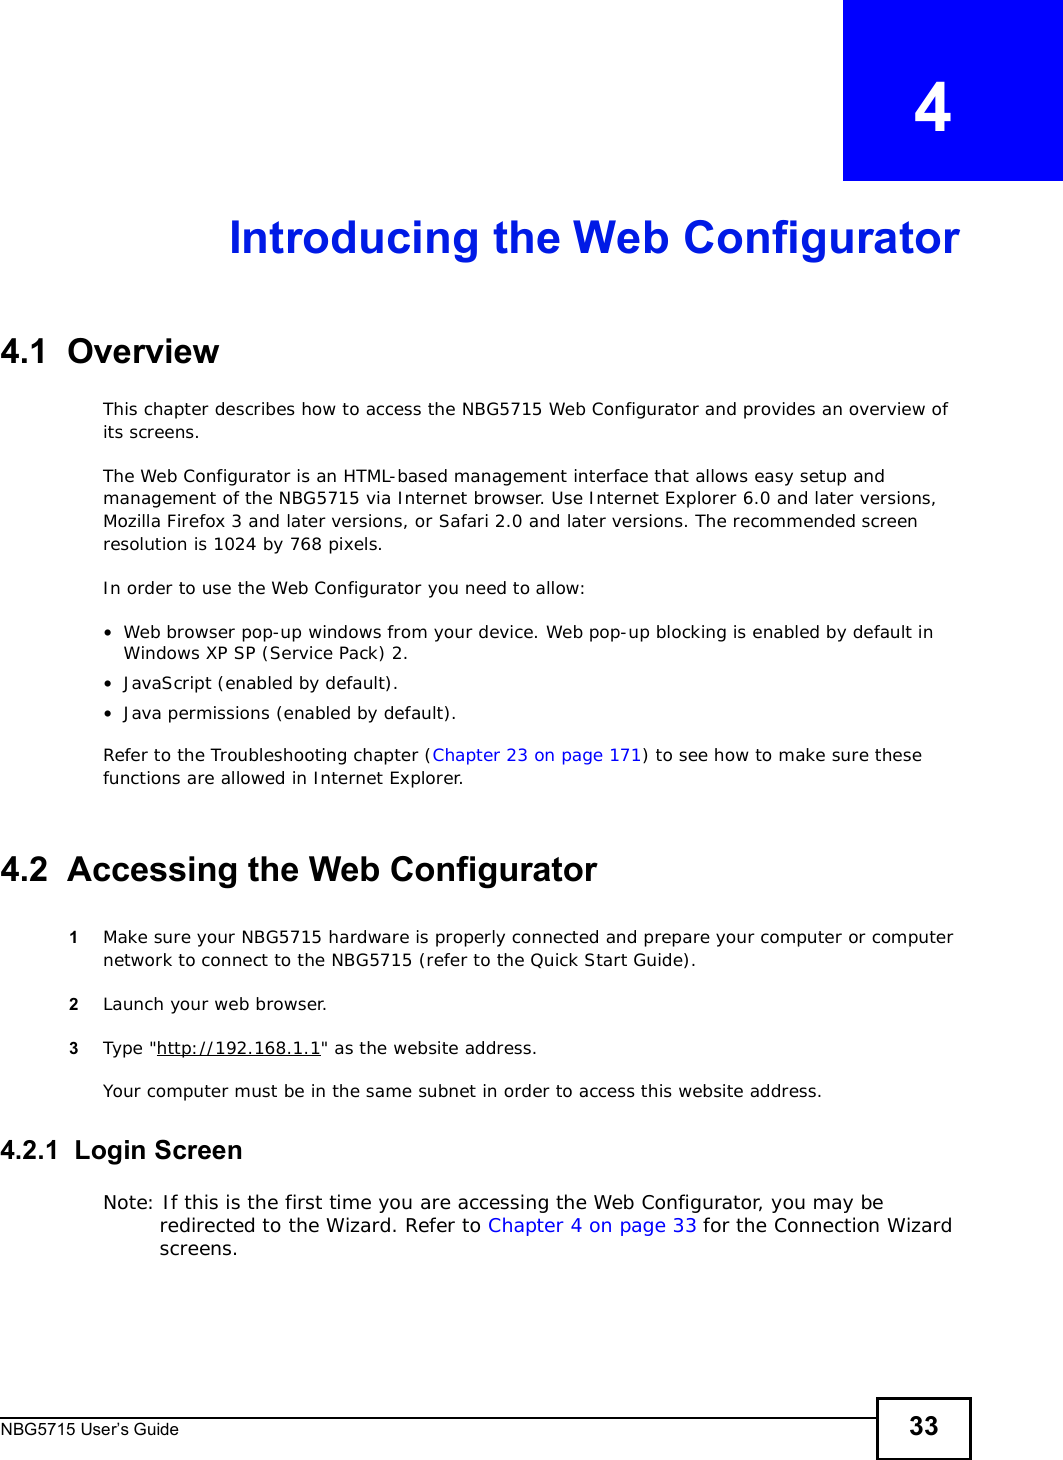 NBG5715 User’s Guide 33CHAPTER   4Introducing the Web Configurator4.1  OverviewThis chapter describes how to access the NBG5715 Web Configurator and provides an overview of its screens.The Web Configurator is an HTML-based management interface that allows easy setup and management of the NBG5715 via Internet browser. Use Internet Explorer 6.0 and later versions, Mozilla Firefox 3 and later versions, or Safari 2.0 and later versions. The recommended screen resolution is 1024 by 768 pixels.In order to use the Web Configurator you need to allow:•Web browser pop-up windows from your device. Web pop-up blocking is enabled by default in Windows XP SP (Service Pack) 2.•JavaScript (enabled by default).•Java permissions (enabled by default).Refer to the Troubleshooting chapter (Chapter 23 on page 171) to see how to make sure these functions are allowed in Internet Explorer.4.2  Accessing the Web Configurator1Make sure your NBG5715 hardware is properly connected and prepare your computer or computer network to connect to the NBG5715 (refer to the Quick Start Guide).2Launch your web browser.3Type &quot;http://192.168.1.1&quot; as the website address. Your computer must be in the same subnet in order to access this website address.4.2.1  Login ScreenNote: If this is the first time you are accessing the Web Configurator, you may be redirected to the Wizard. Refer to Chapter 4 on page 33 for the Connection Wizard screens. 